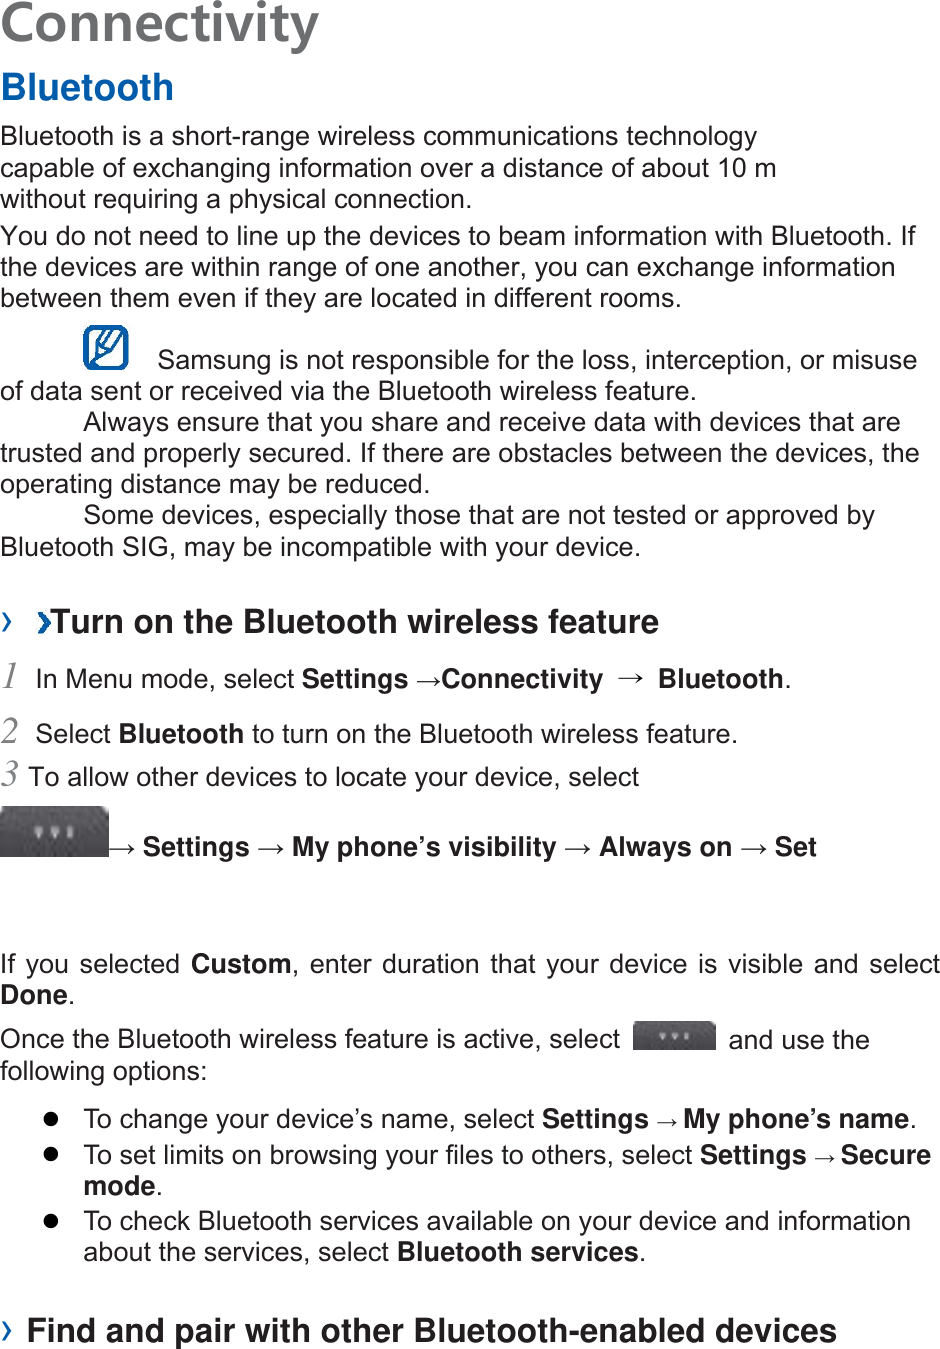 Connectivity   Bluetooth   Bluetooth is a short-range wireless communications technology capable of exchanging information over a distance of about 10 m without requiring a physical connection.   You do not need to line up the devices to beam information with Bluetooth. If the devices are within range of one another, you can exchange information between them even if they are located in different rooms.      Samsung is not responsible for the loss, interception, or misuse of data sent or received via the Bluetooth wireless feature.     Always ensure that you share and receive data with devices that are trusted and properly secured. If there are obstacles between the devices, the operating distance may be reduced.     Some devices, especially those that are not tested or approved by Bluetooth SIG, may be incompatible with your device.    ›  Turn on the Bluetooth wireless feature   1 In Menu mode, select Settings →Connectivity  → Bluetooth.  2 Select Bluetooth to turn on the Bluetooth wireless feature.   3 To allow other devices to locate your device, select   → Settings → My phone’s visibility → Always on → Set If you selected Custom, enter duration that your device is visible and select Done.  Once the Bluetooth wireless feature is active, select    and use the following options:    To change your device’s name, select Settings → My phone’s name.    To set limits on browsing your files to others, select Settings → Secure mode.    To check Bluetooth services available on your device and information about the services, select Bluetooth services.    › Find and pair with other Bluetooth-enabled devices   